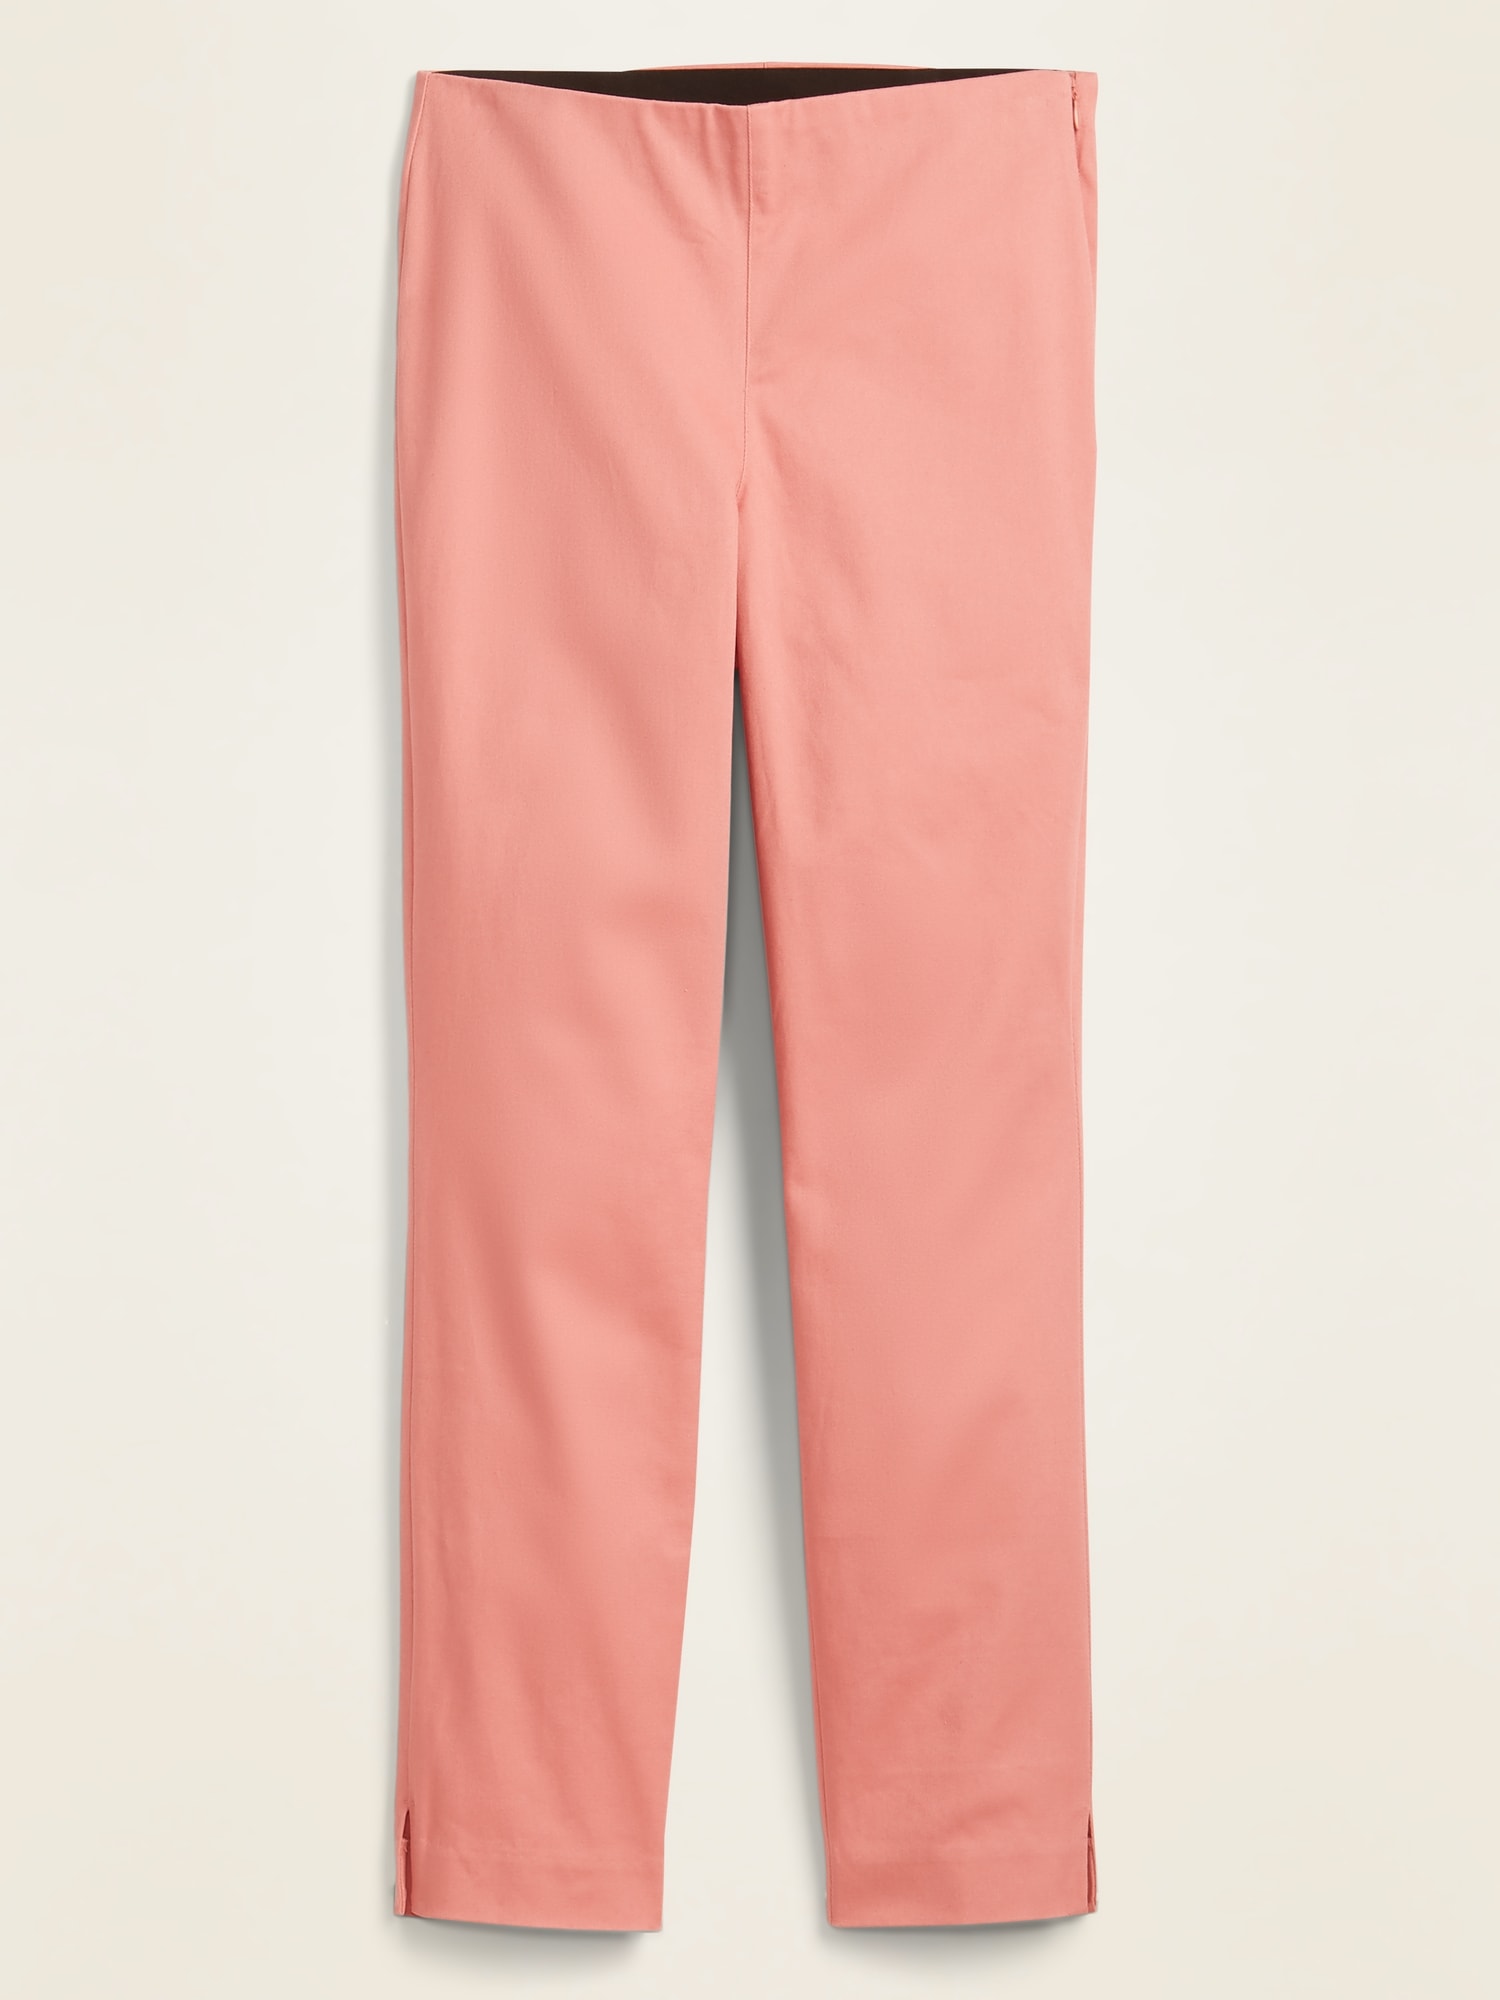 High-Waisted Super Skinny Ankle Pants for Women